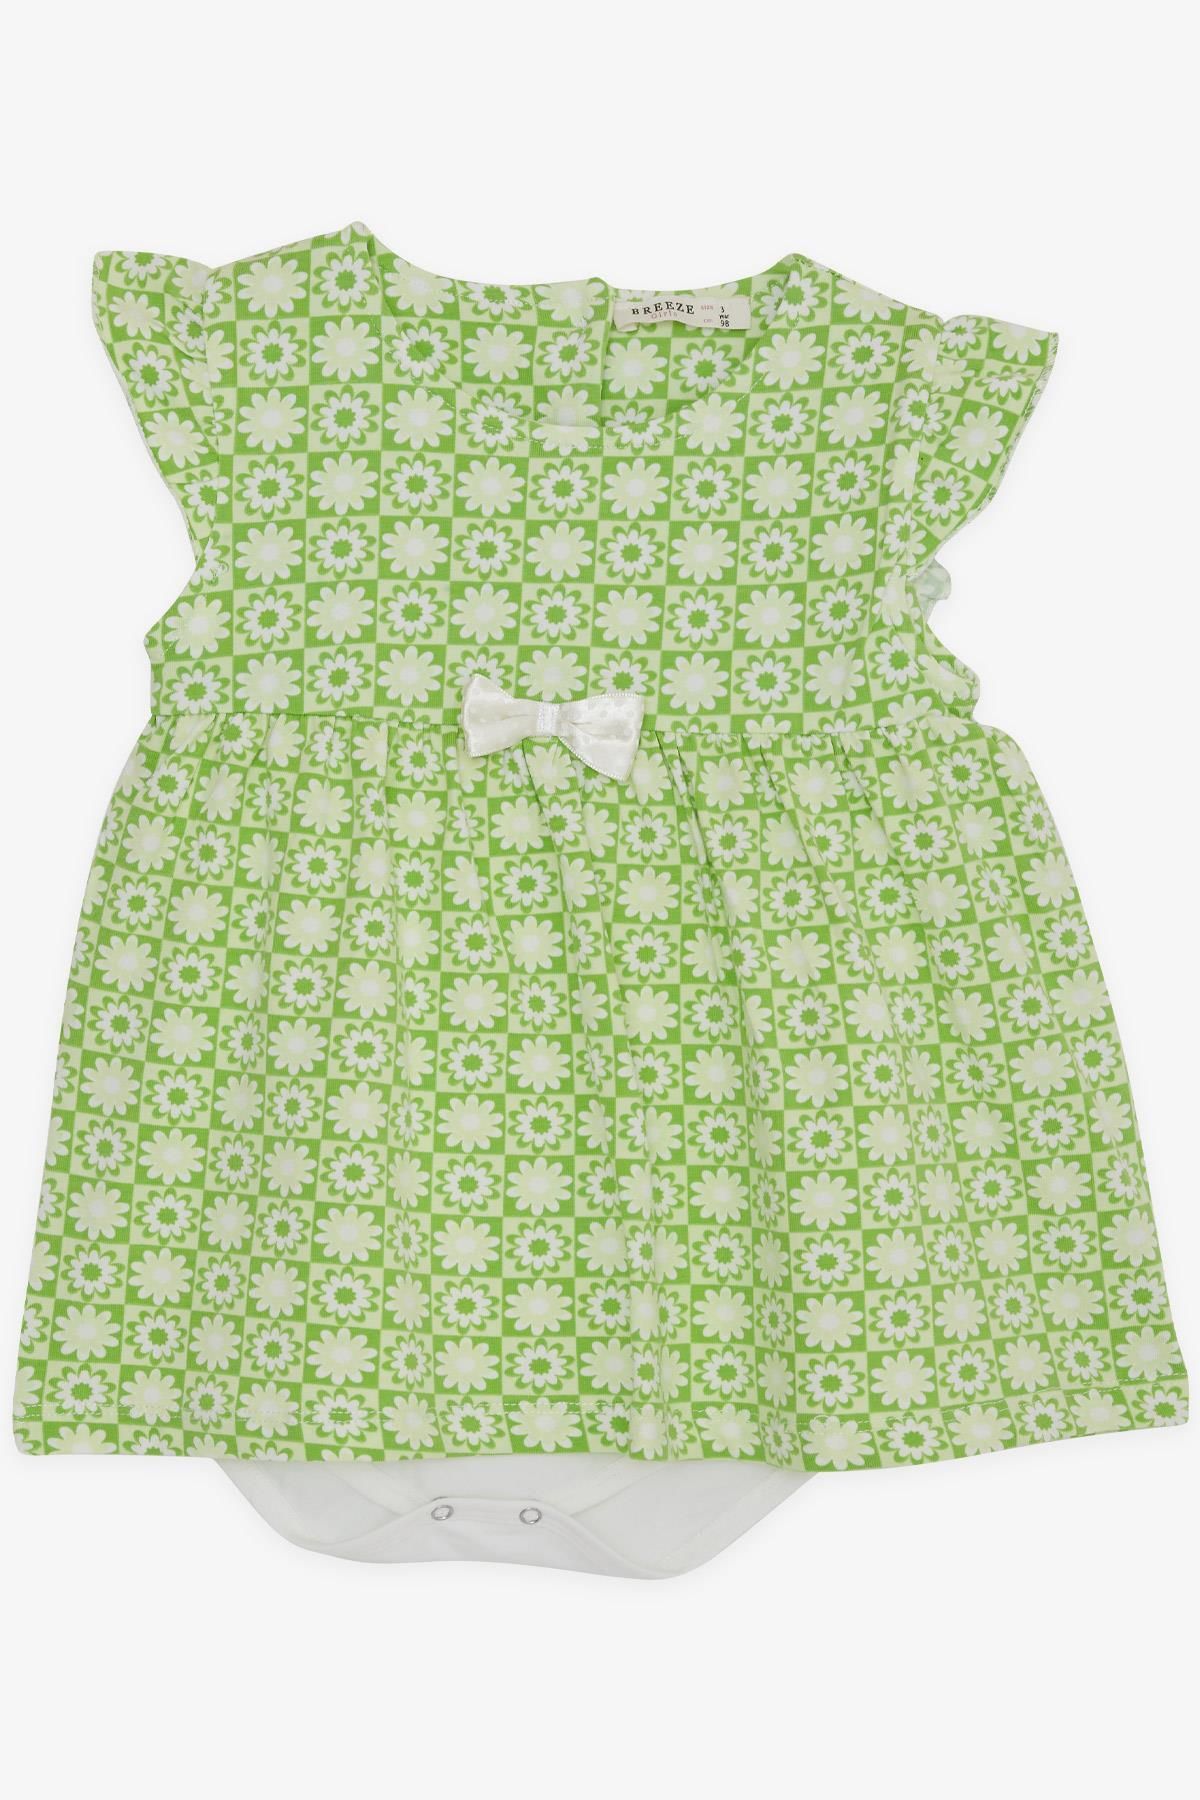 $27.49 White Organza Flowers Baby Girl Dress For Holidays 3-6-9 Months  #MQ640 - GemGrace.com